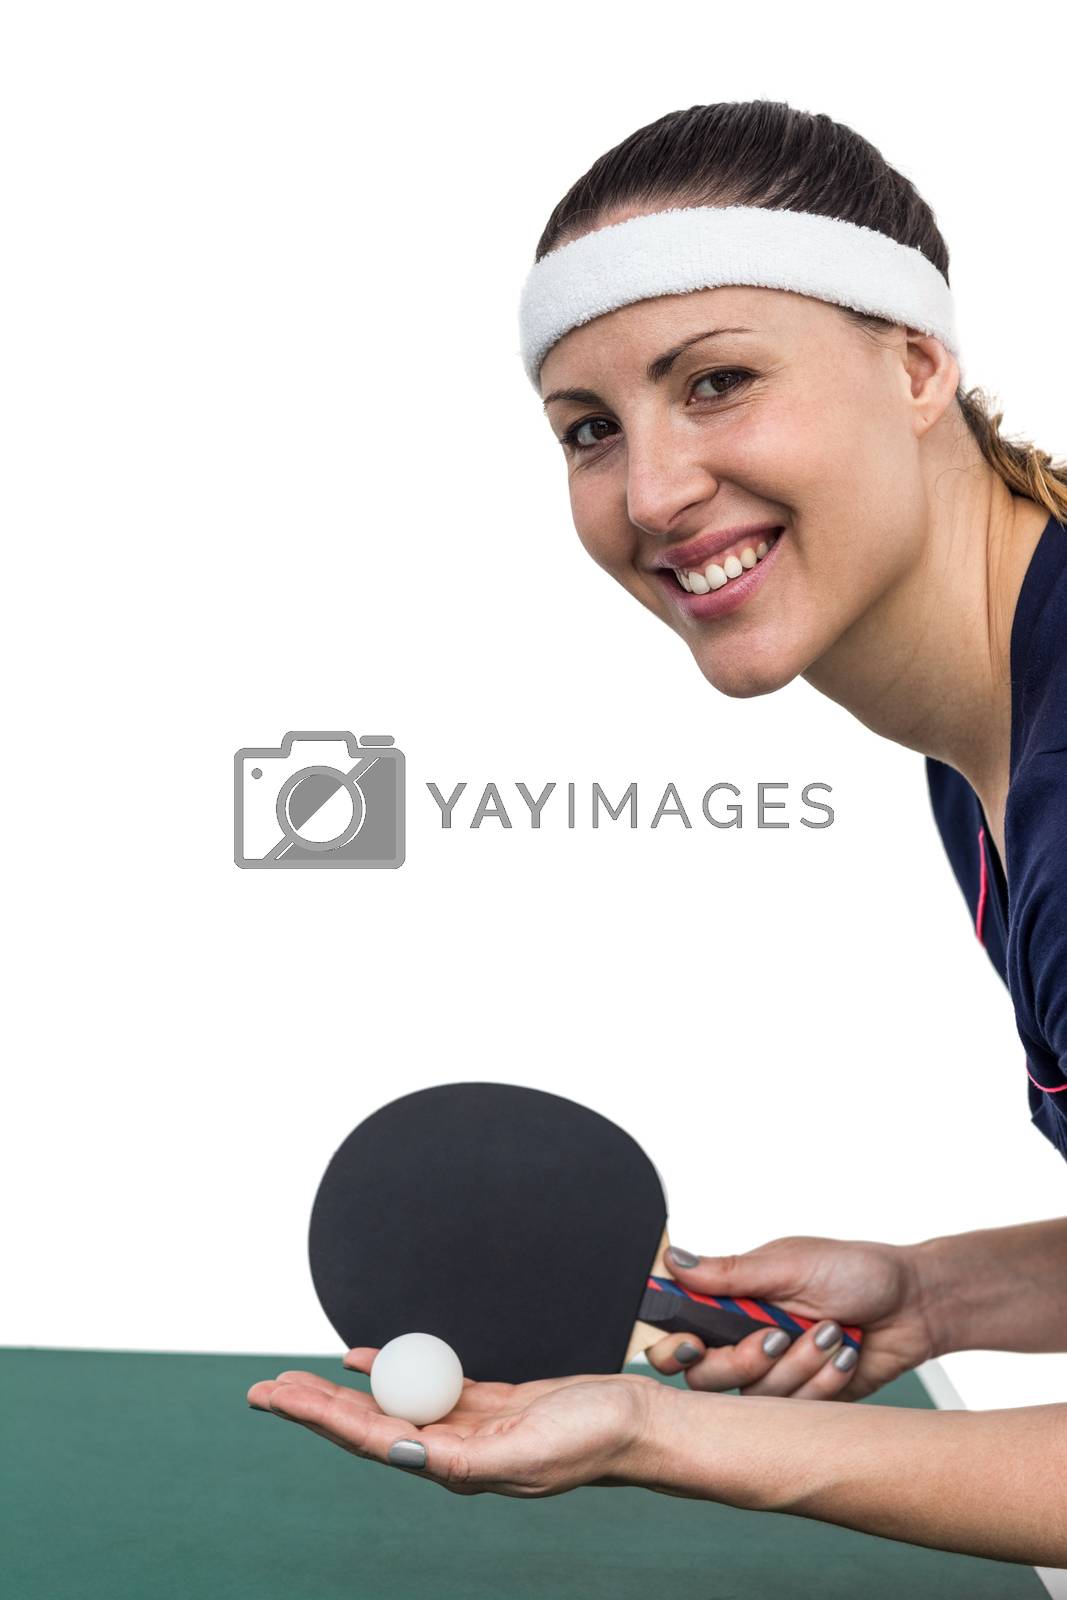 Royalty free image of Female athlete playing table tennis by Wavebreakmedia